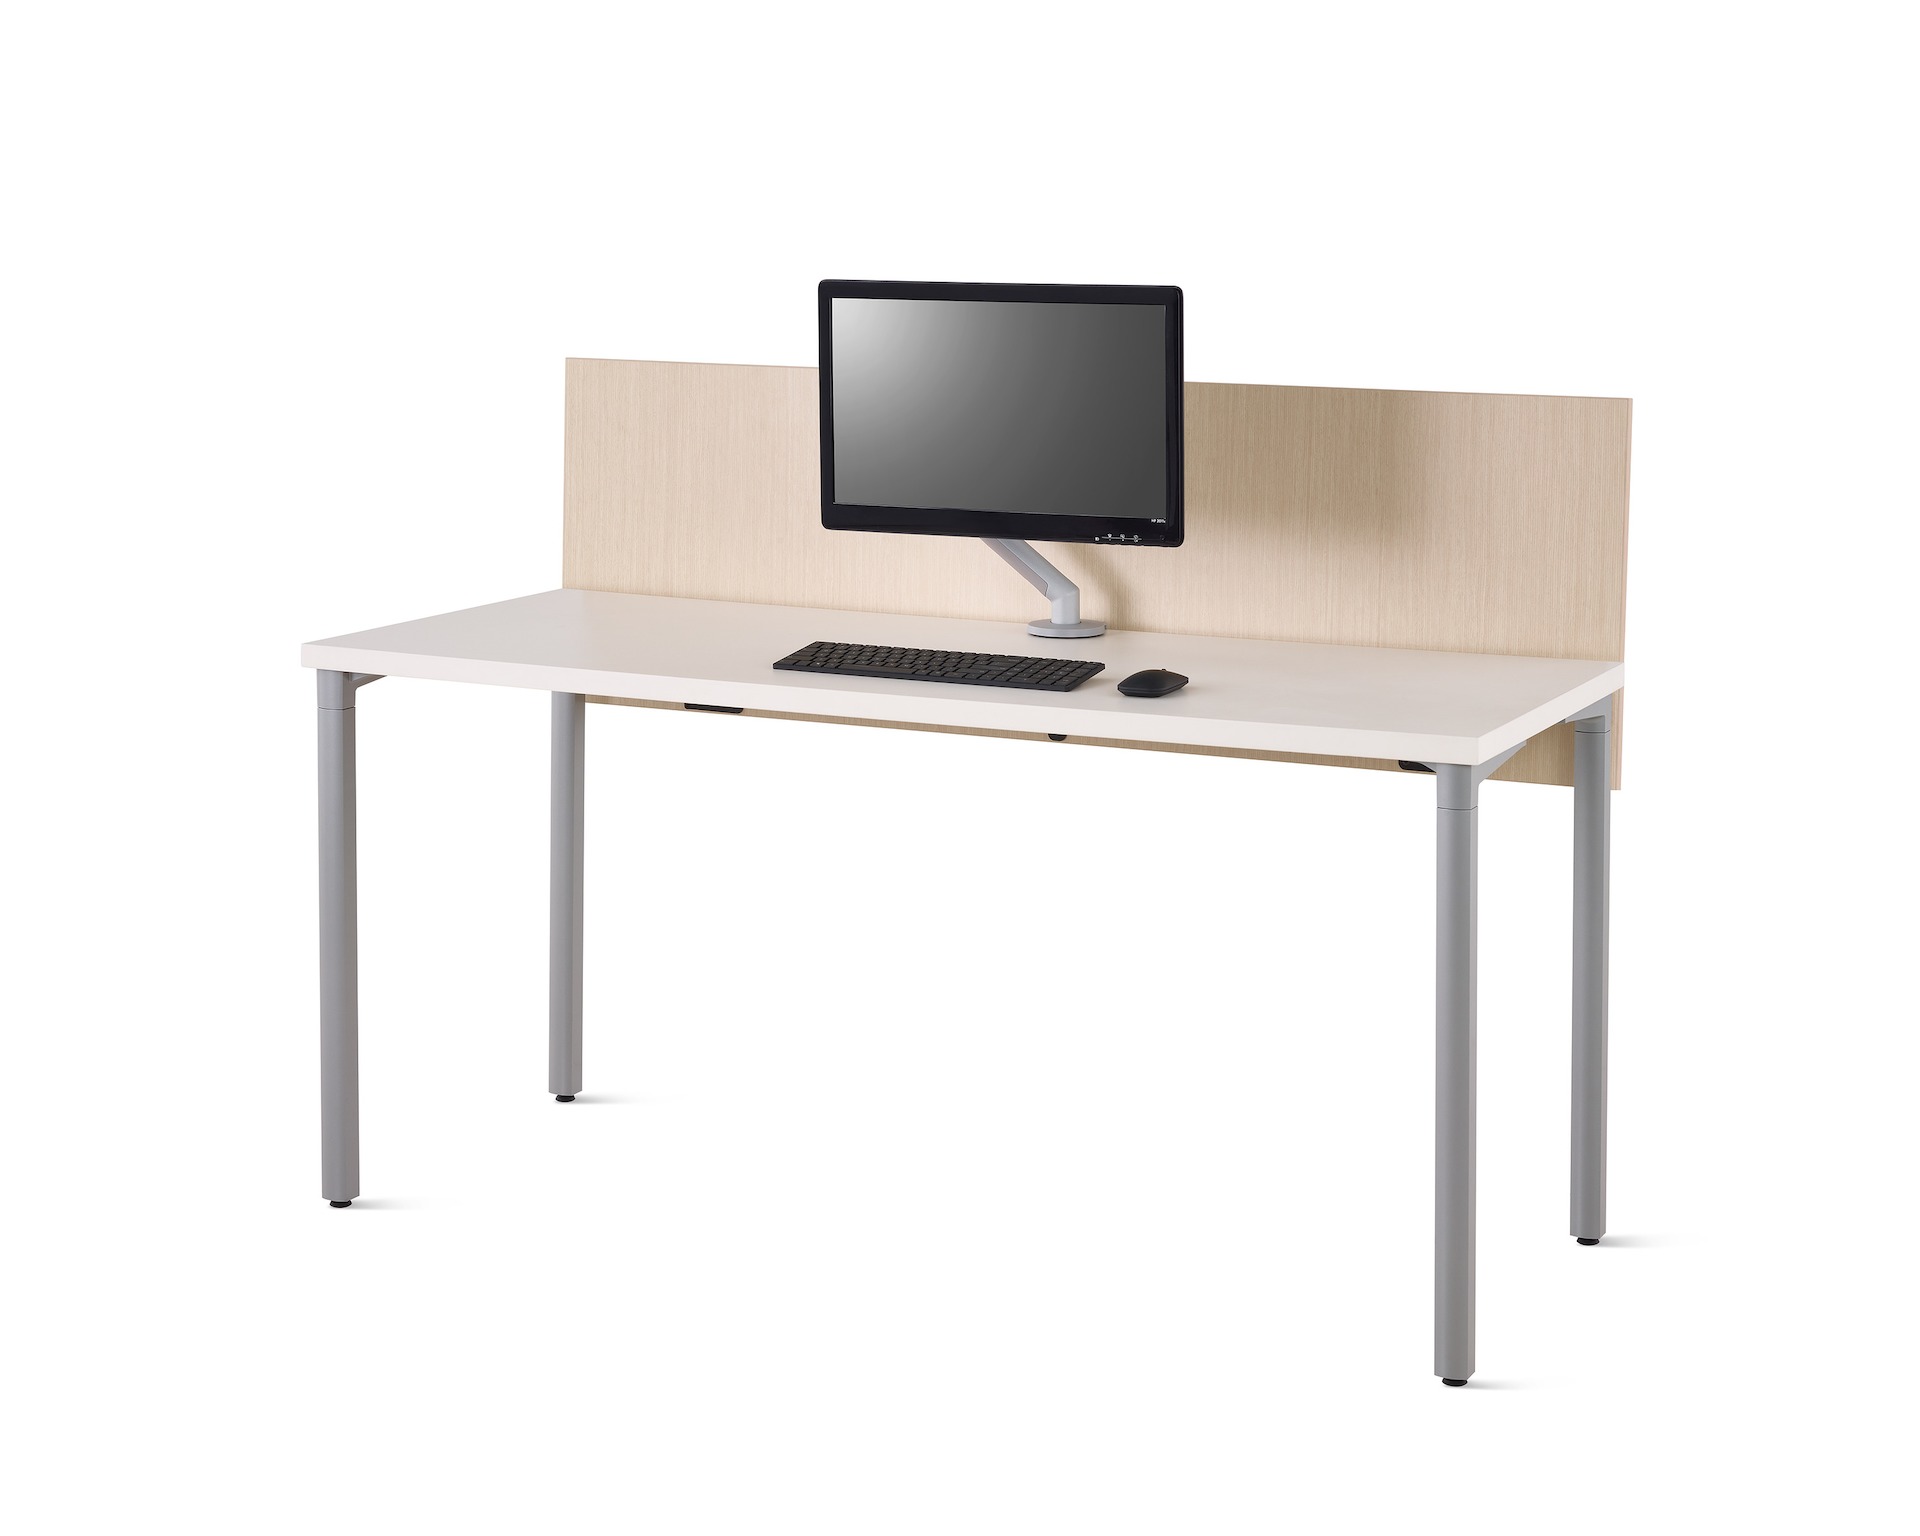 Viewed at an angle, a white Everywhere desk with an ash woodgrain laminate privacy screen, gray legs and silver Flo Monitor Arm.